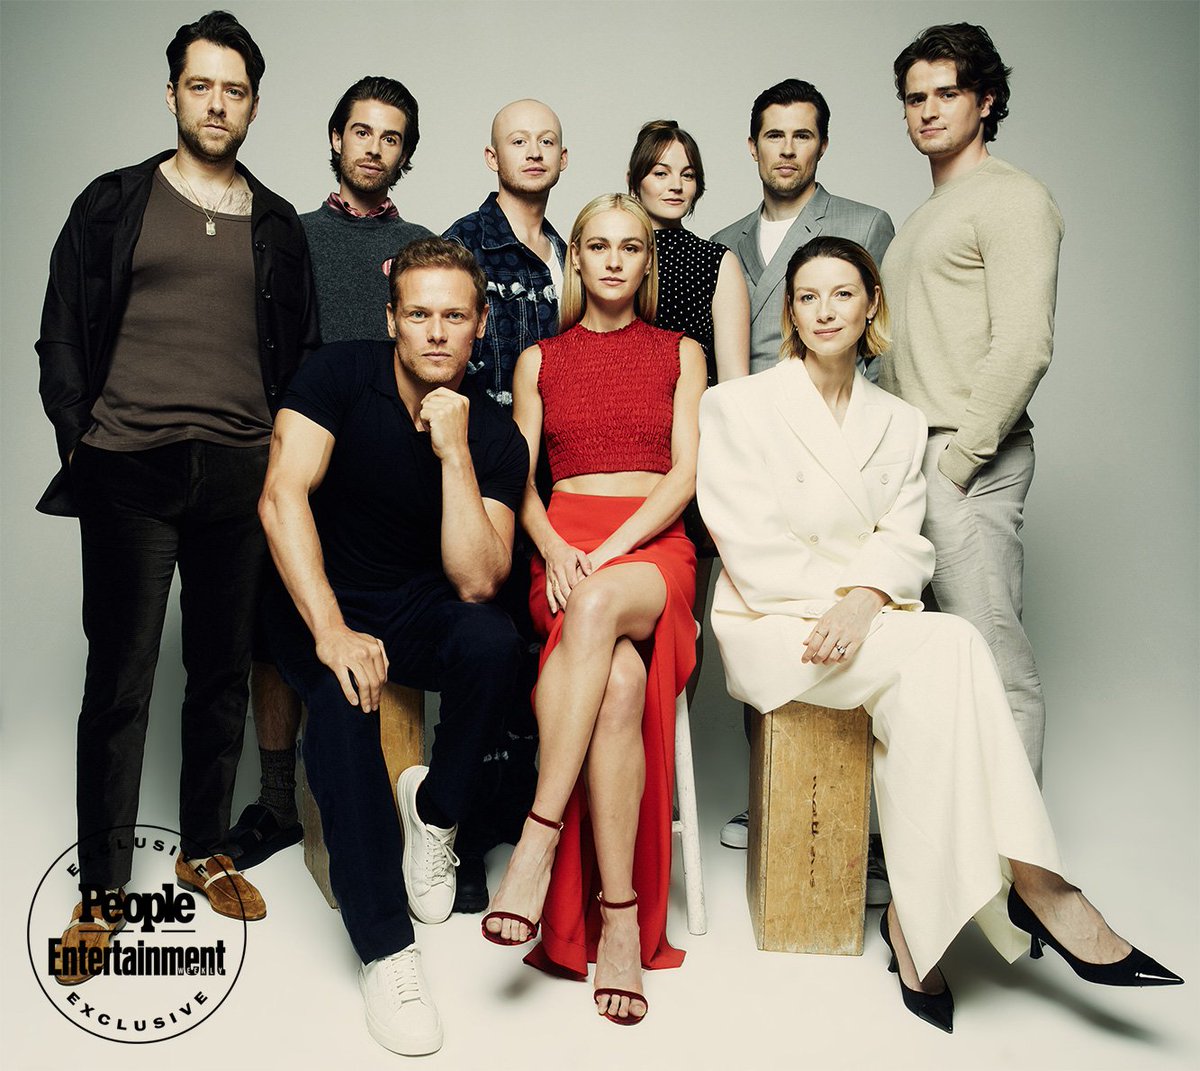 Richard Rankin, Joey Phillips, Sam Heughan, John Bell, Sophie Skelton, Izzy Meikle-Small, David Berry, Caitriona Balfe, and Charles Vandervaart (Outlander)

The annual Tribeca Film Festival 

EW and PEOPLE's exclusive portraits.

CREDIT: ERIK TANNER/CONTOUR BY GETTY IMAGES